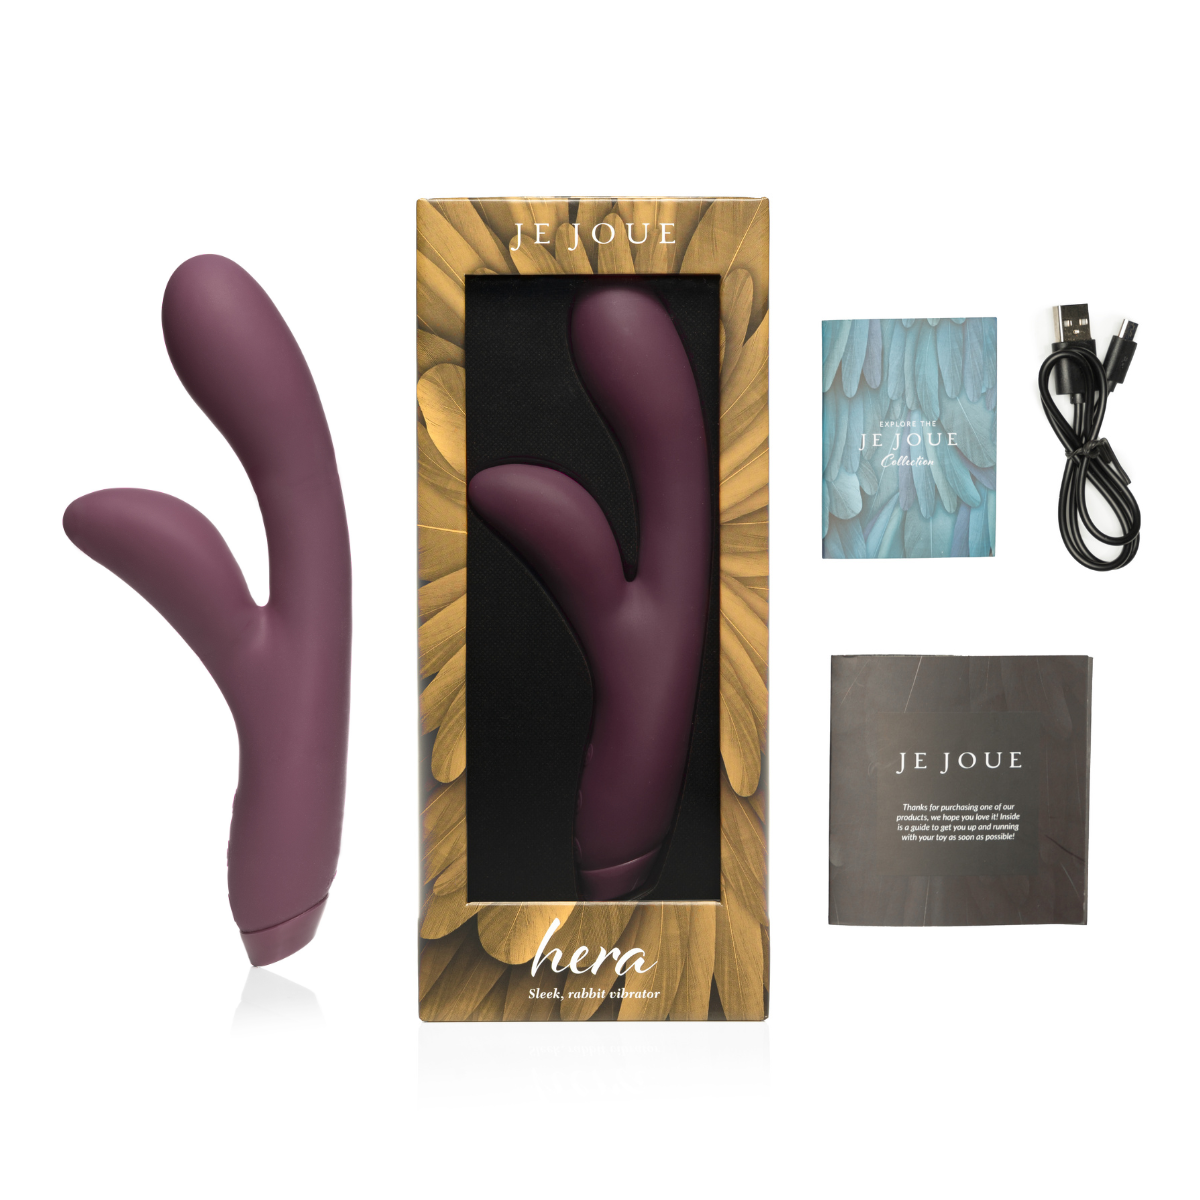 Hera Vibrator in and out of box with accessories on side 